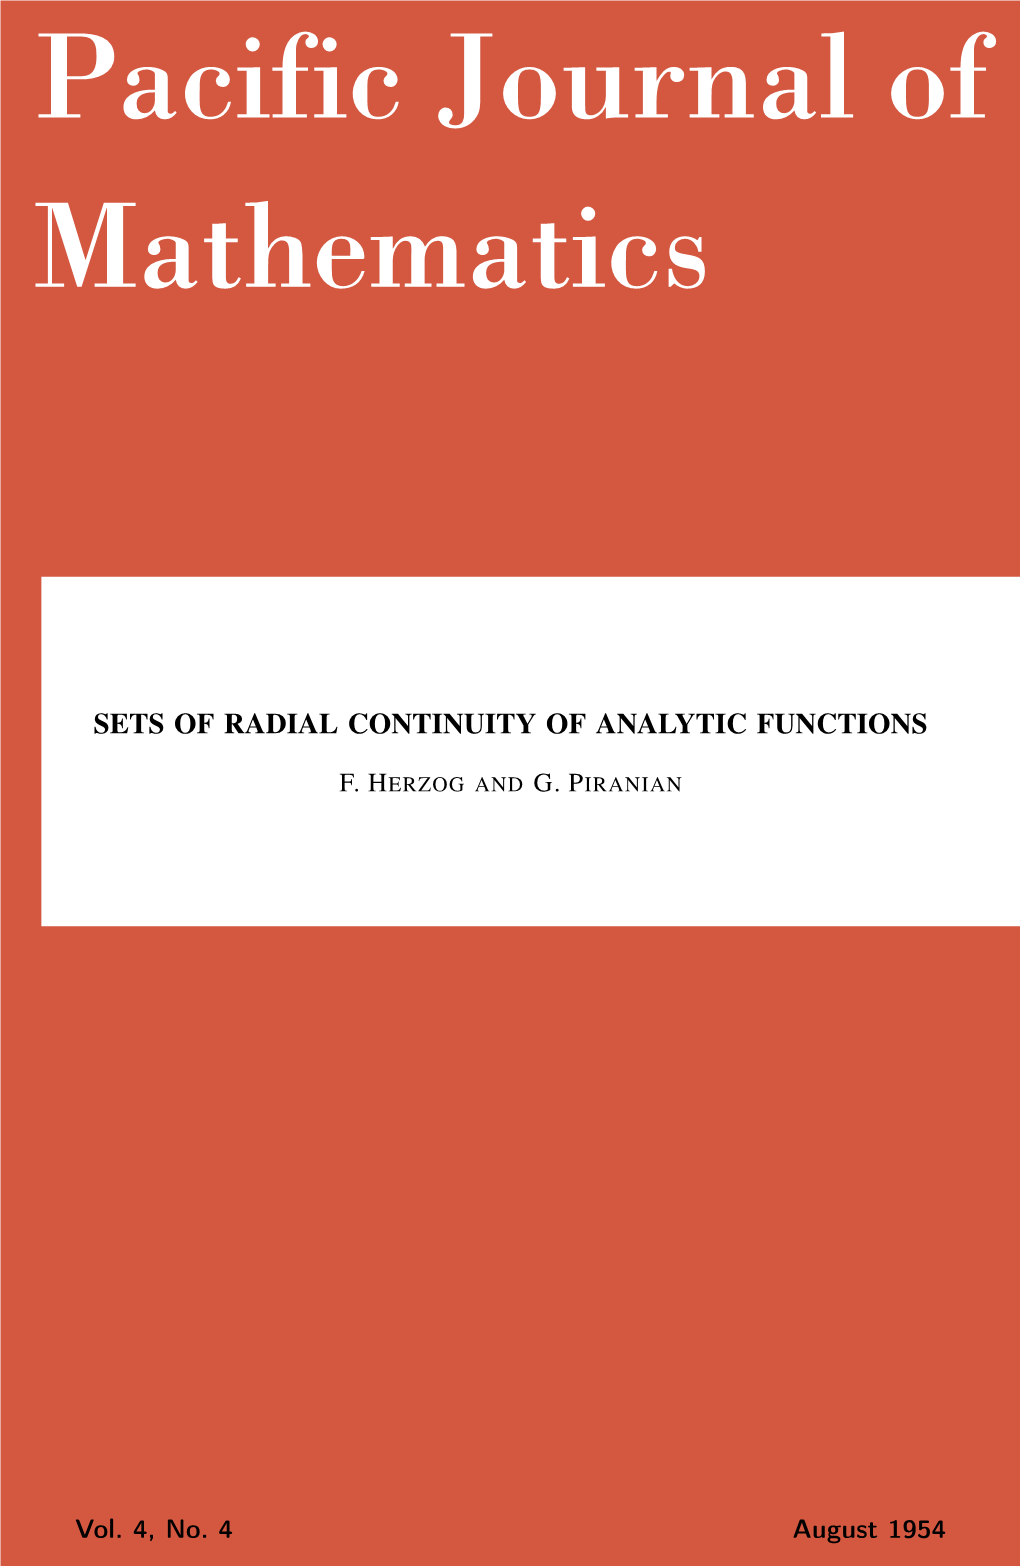 Sets of Radial Continuity of Analytic Functions